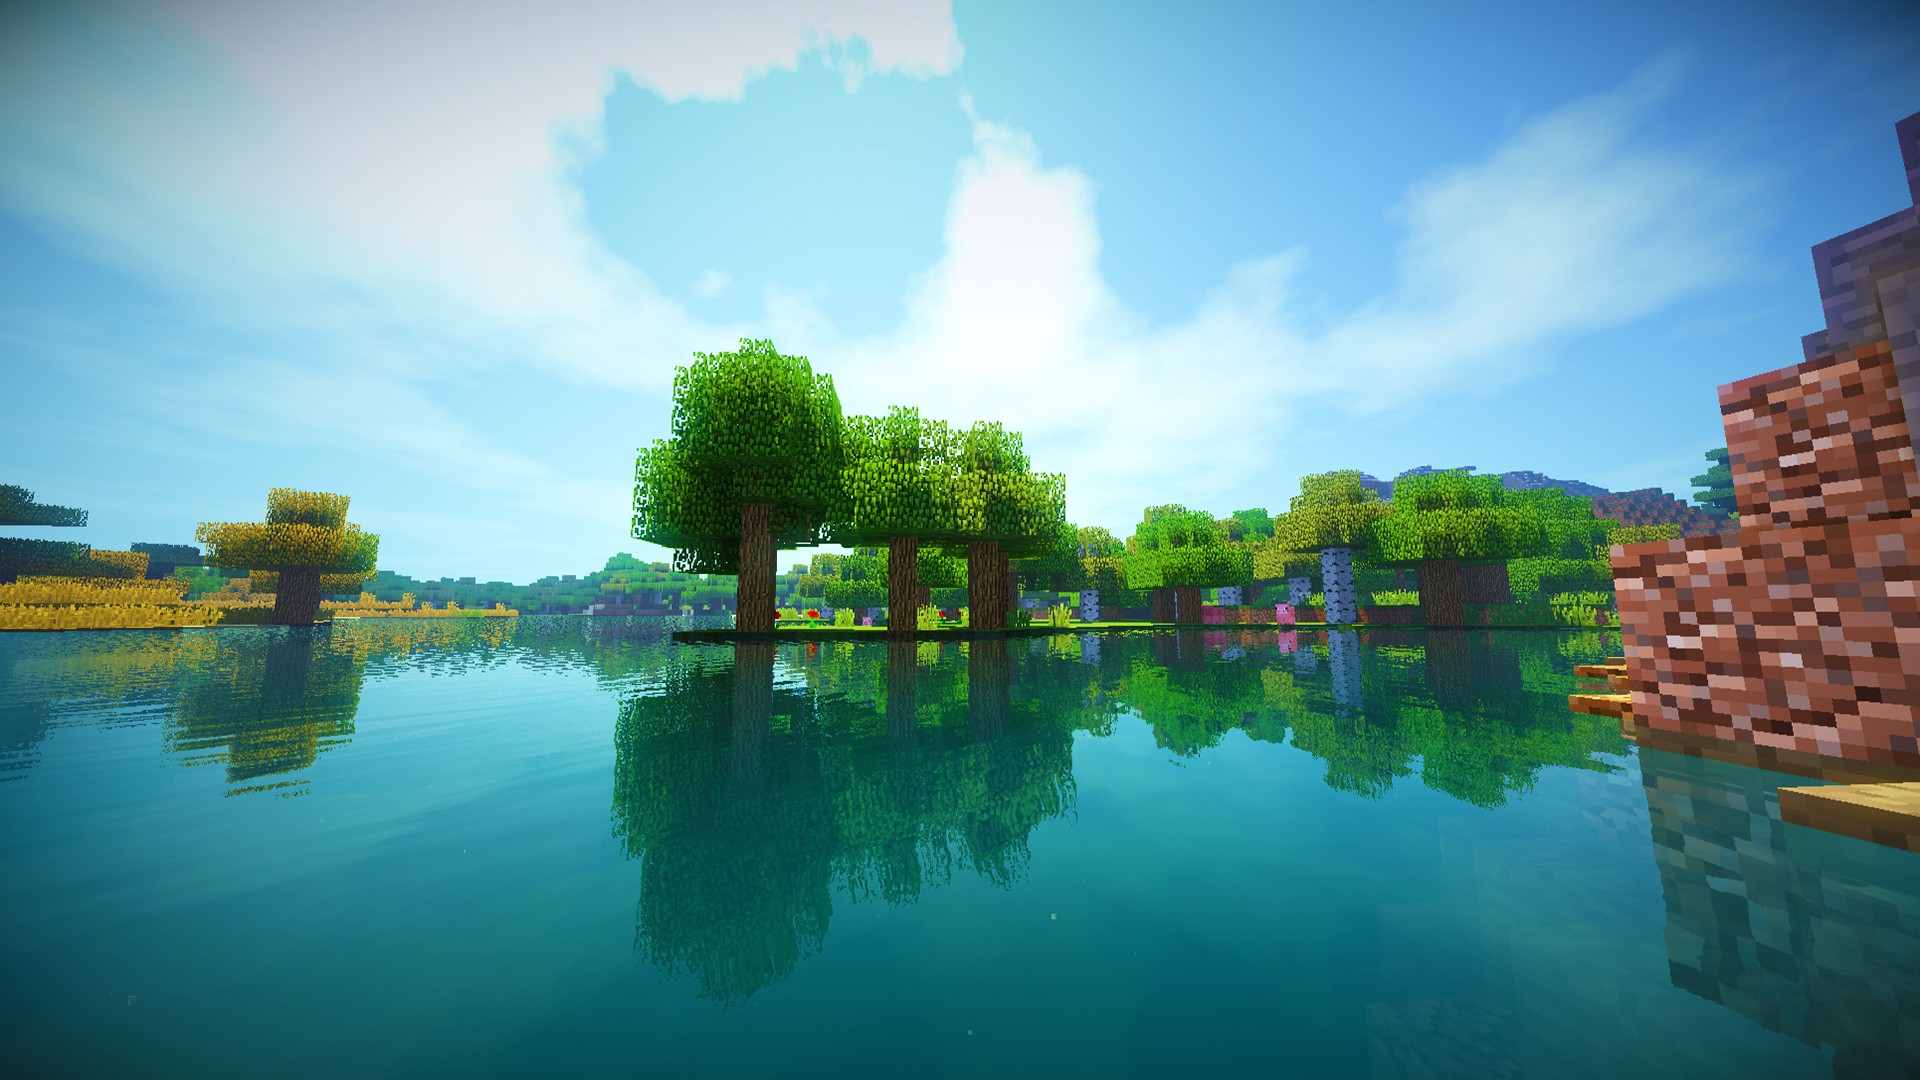 General 1920x1080 Minecraft shaders screen shot video games PC gaming